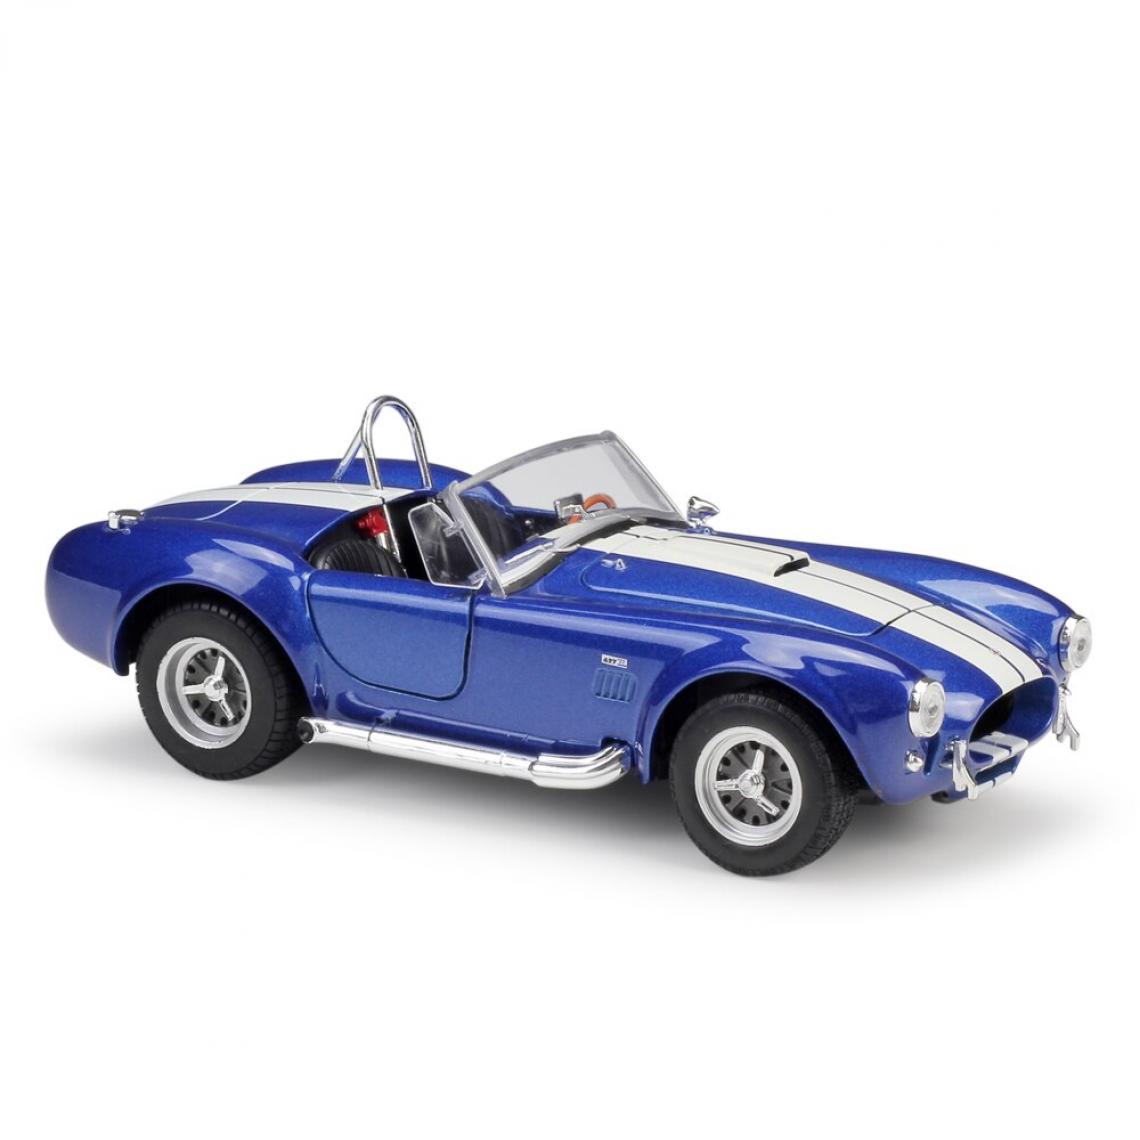 Universal - 1: 24 1965 Shelby Cobra 427 Classic Car Static Moulding Vehicle Collection Model Car Toy Gift | Moulding Toy Car (Bleu) - Voitures